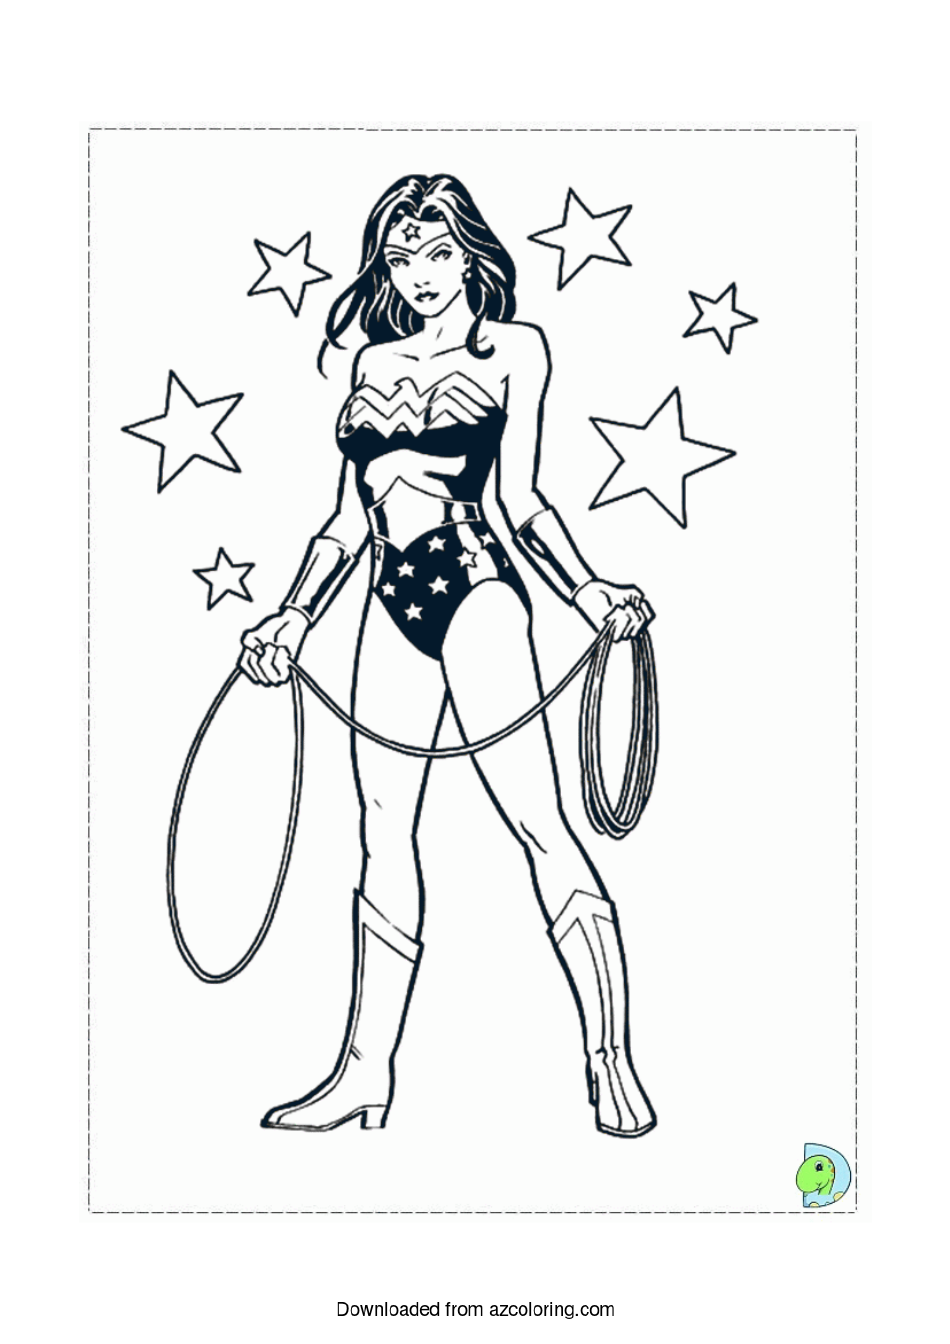 Wonder Woman Coloring Page, Page 1